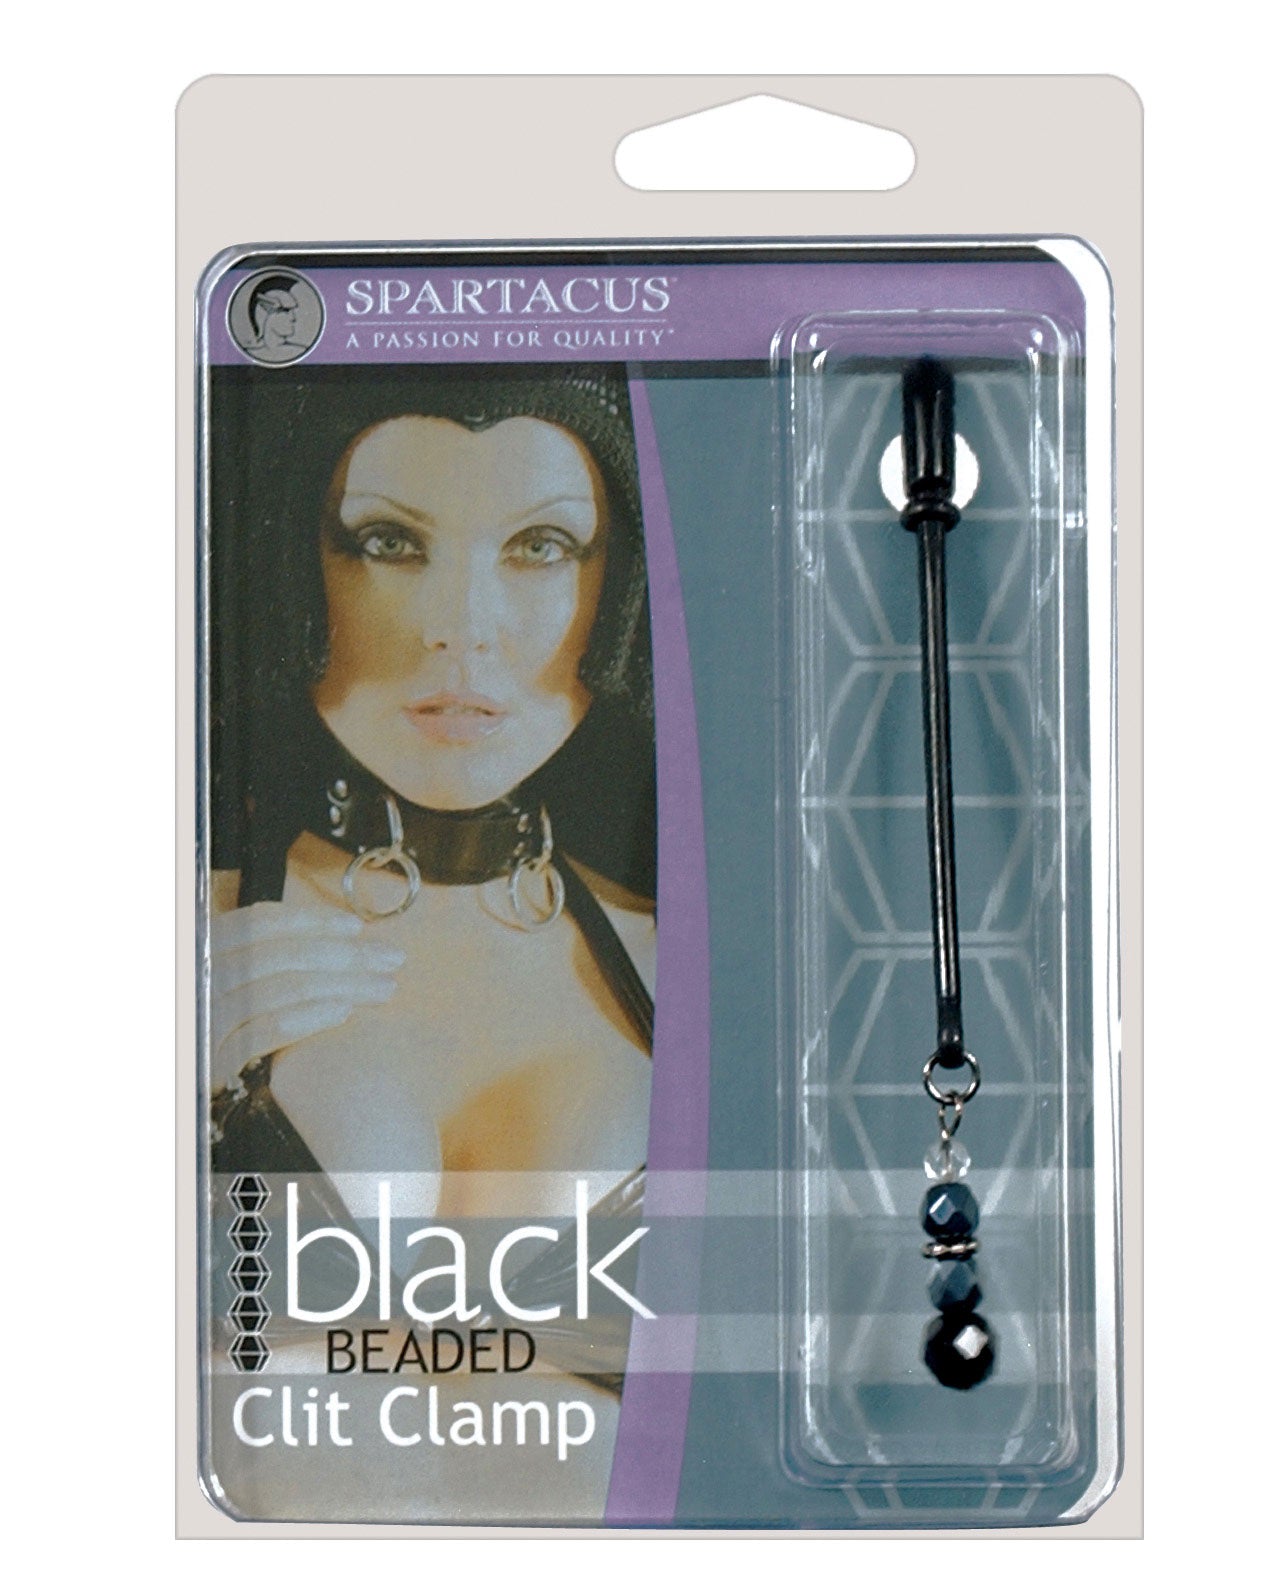 Spartacus Black Beaded Clit Clamps - LUST Depot